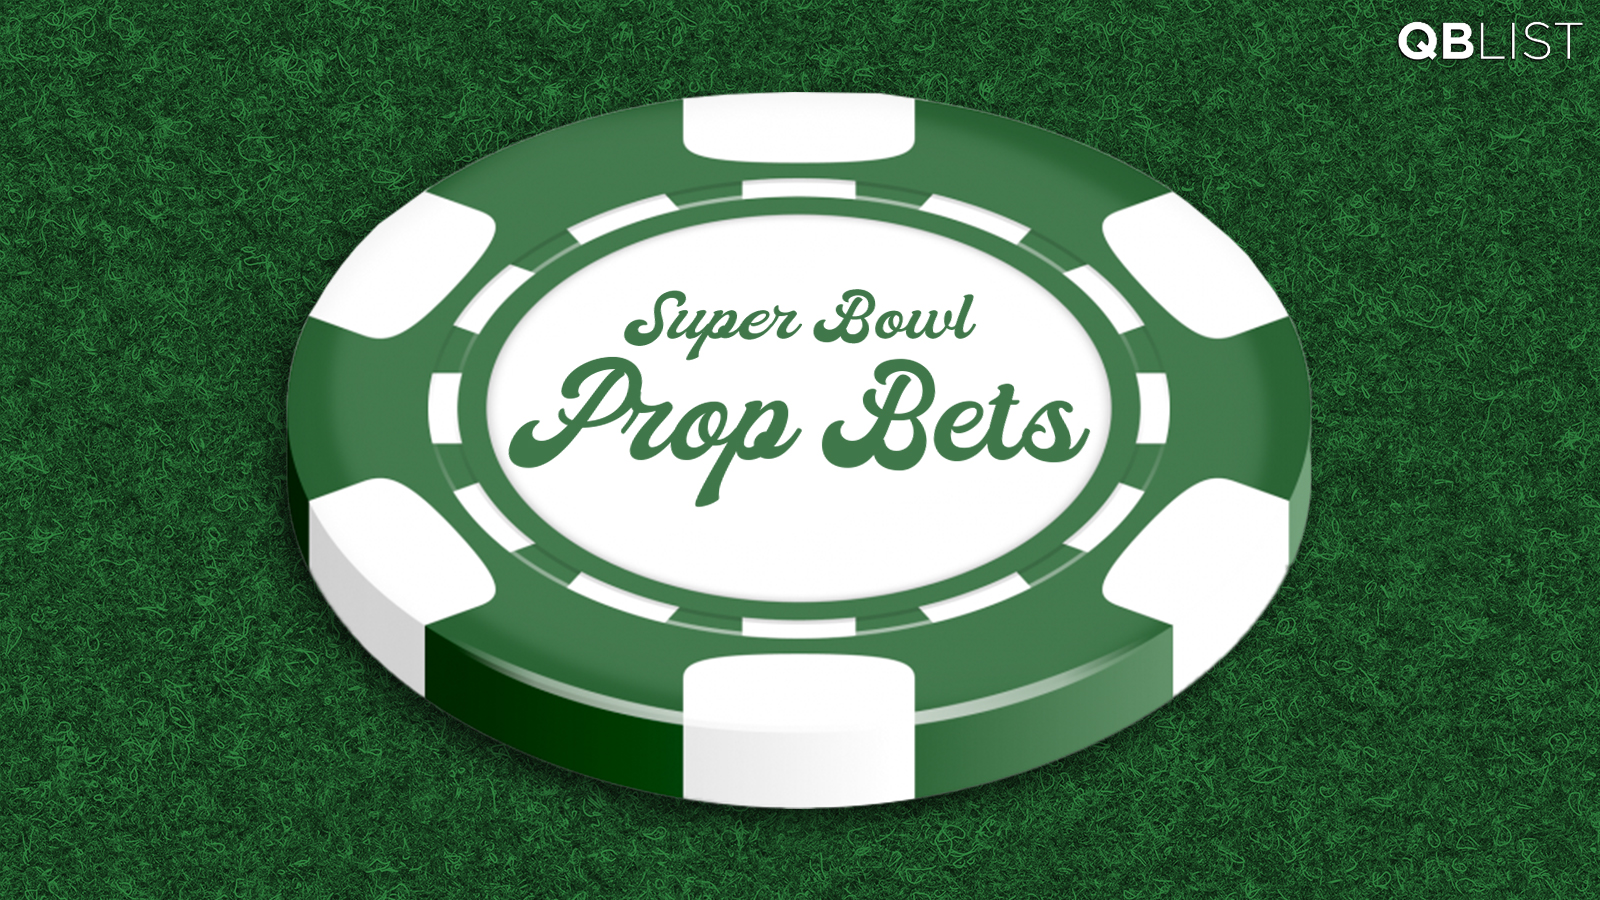 Best Super Bowl Prop Bets: Every Bet I've Made (So Far)